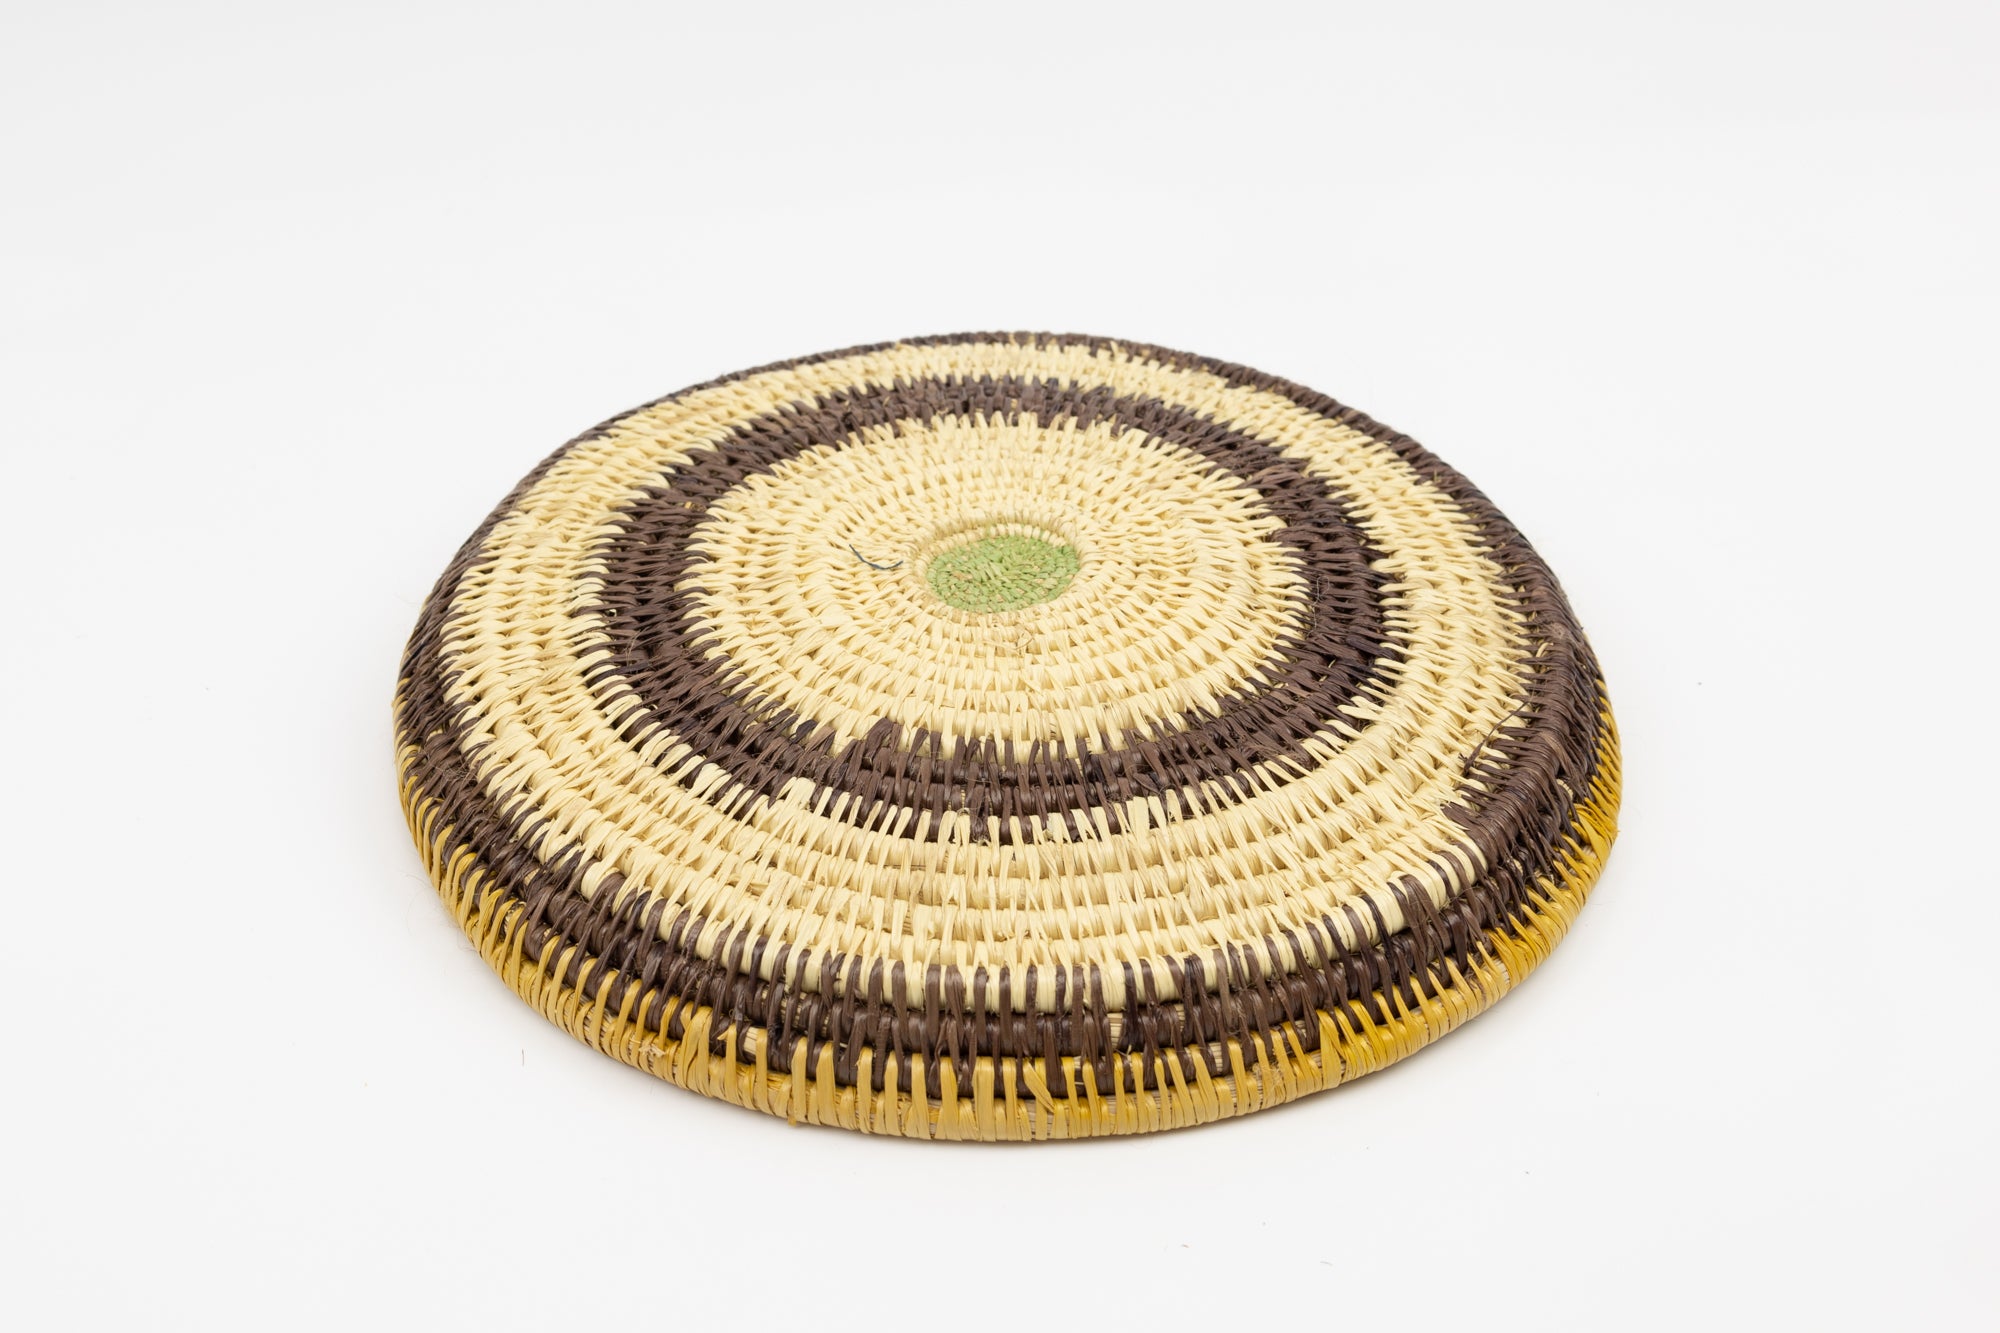 Hand woven plate basket. Palm fiber and natural dyes. Woven in Panama. colors brown and green.